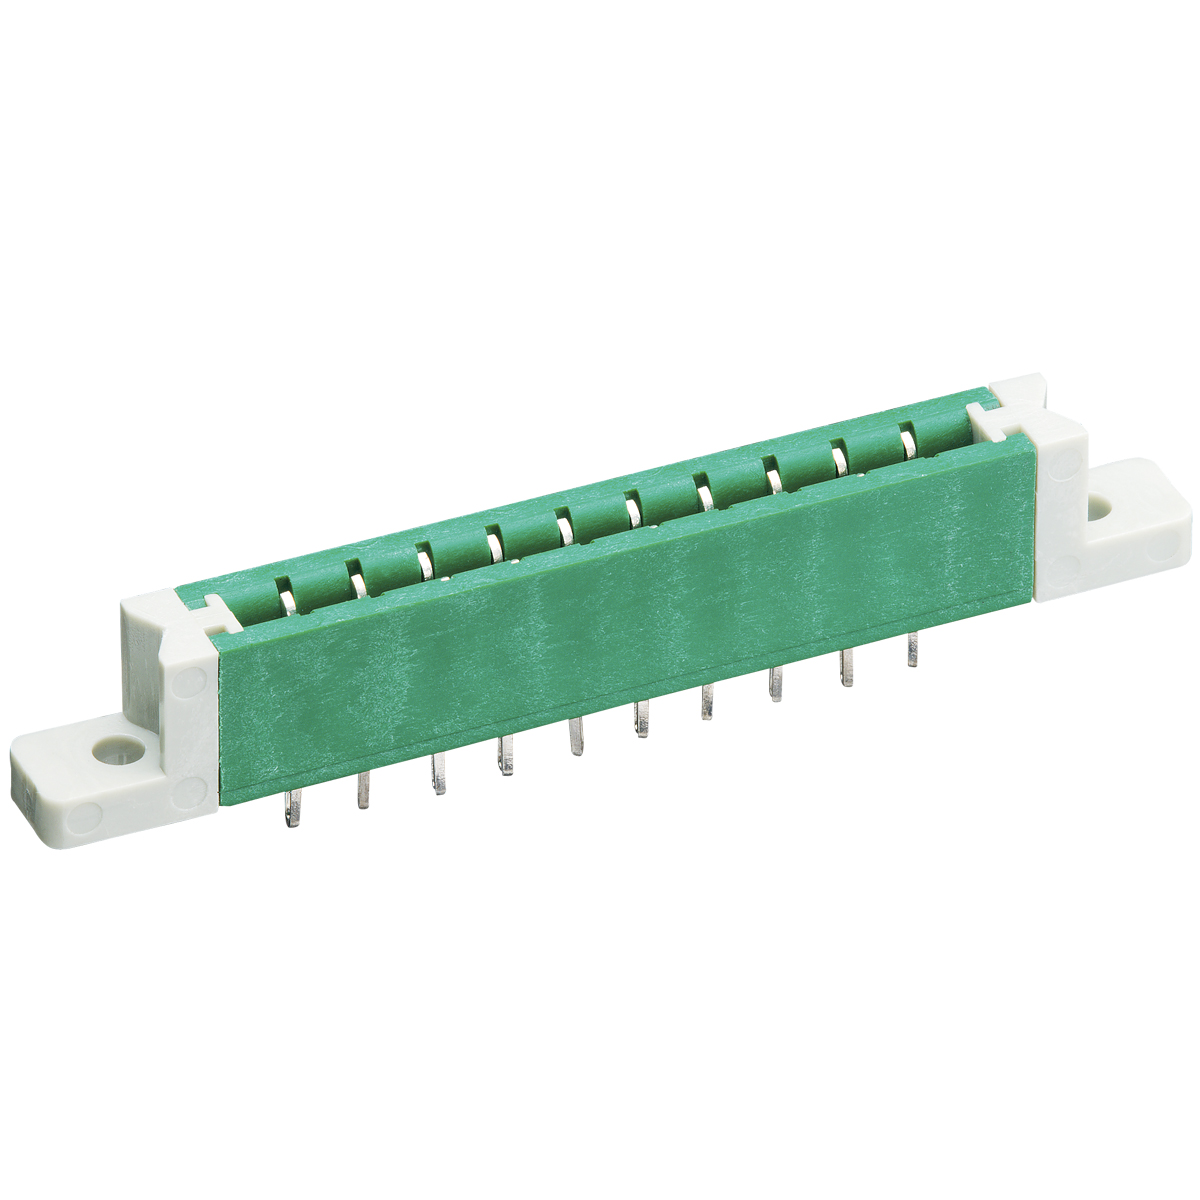 Lumberg: 5 UF (Series 51 | Direct connectors for insert cards, pitch 2.5/2.54/5.0/5.08 mm)